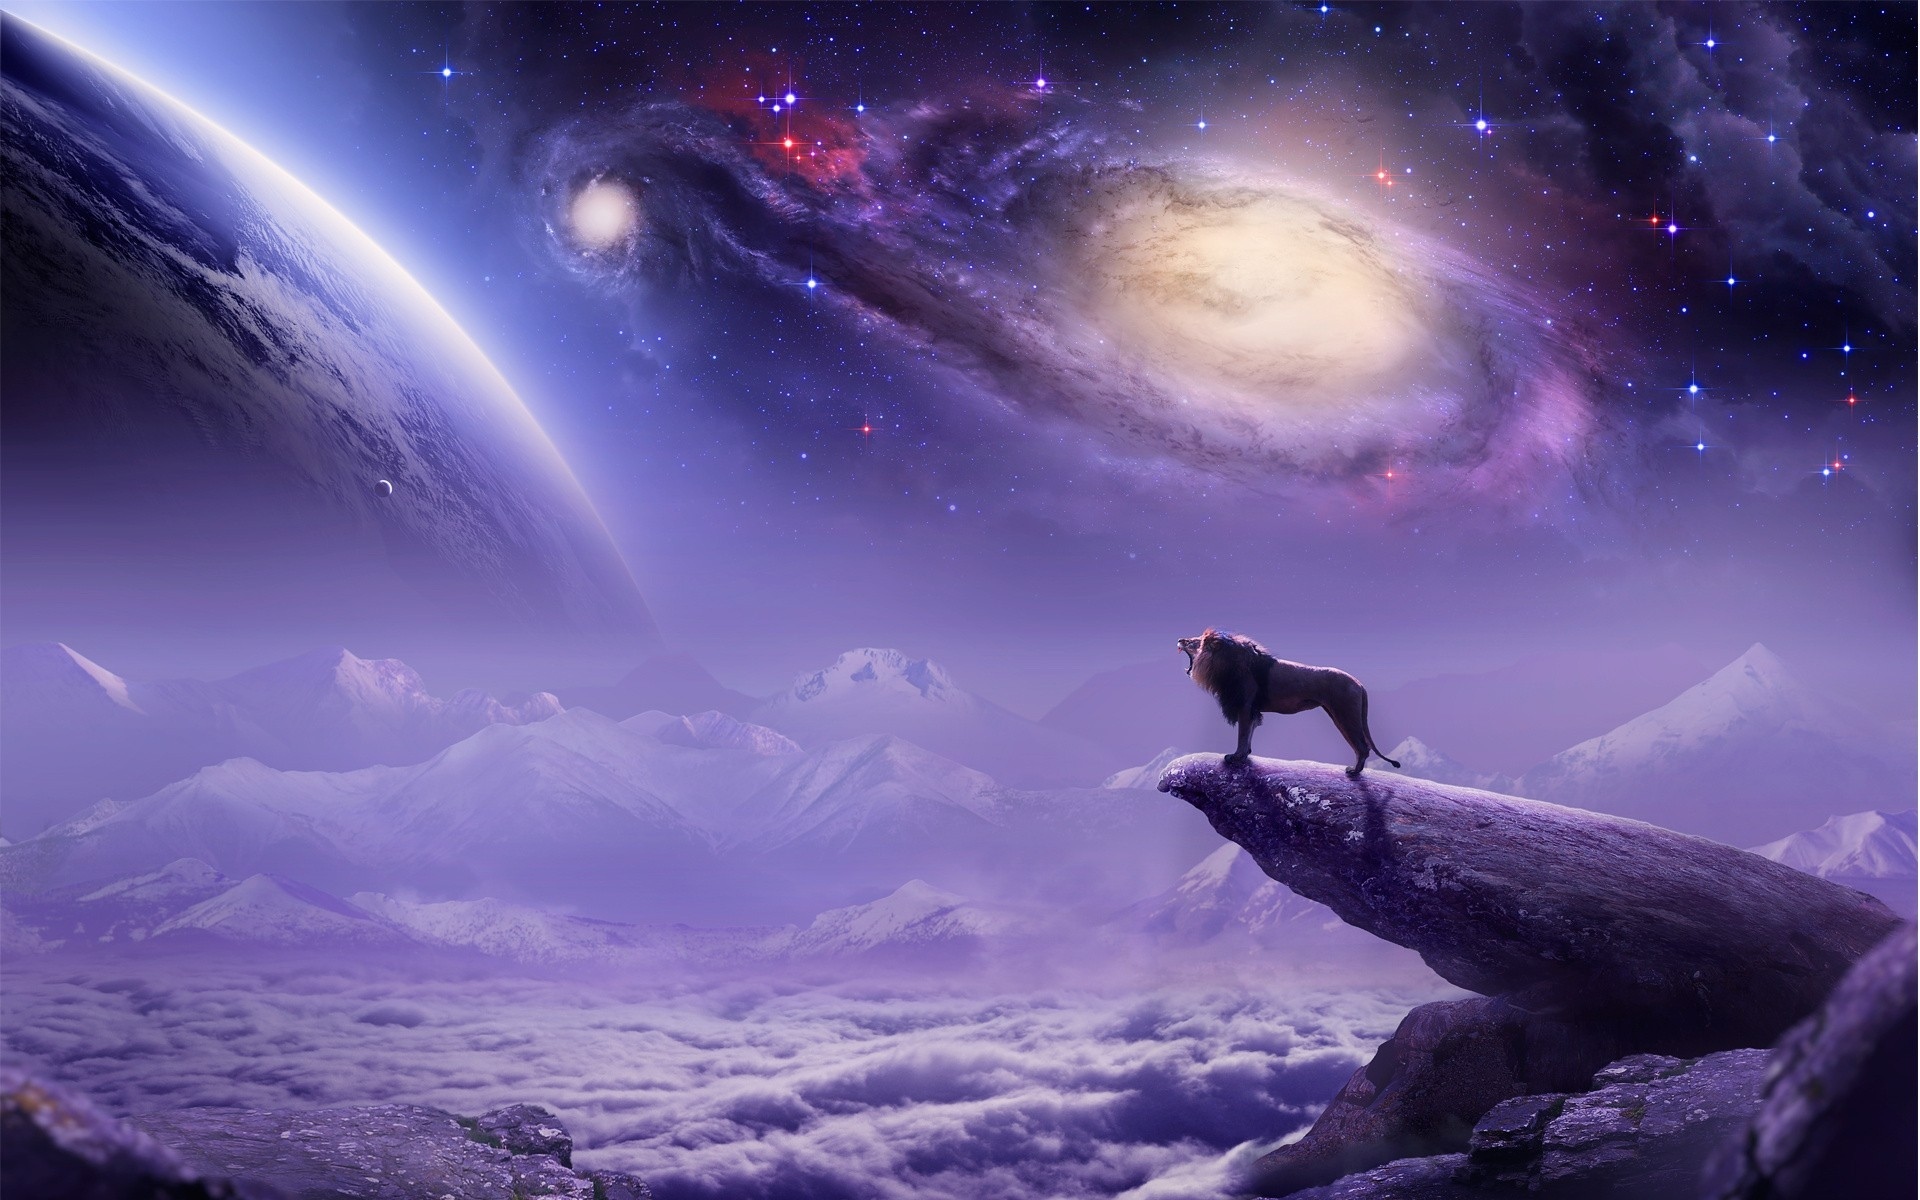 paintings, Airbrush, Cg, Digital, Art, Lion, Landscapes, Fantasy, Mountains, Clouds, Dream, King, Sci, Fi, Sky, Stars, Planets, Galaxy, Nebula Wallpaper